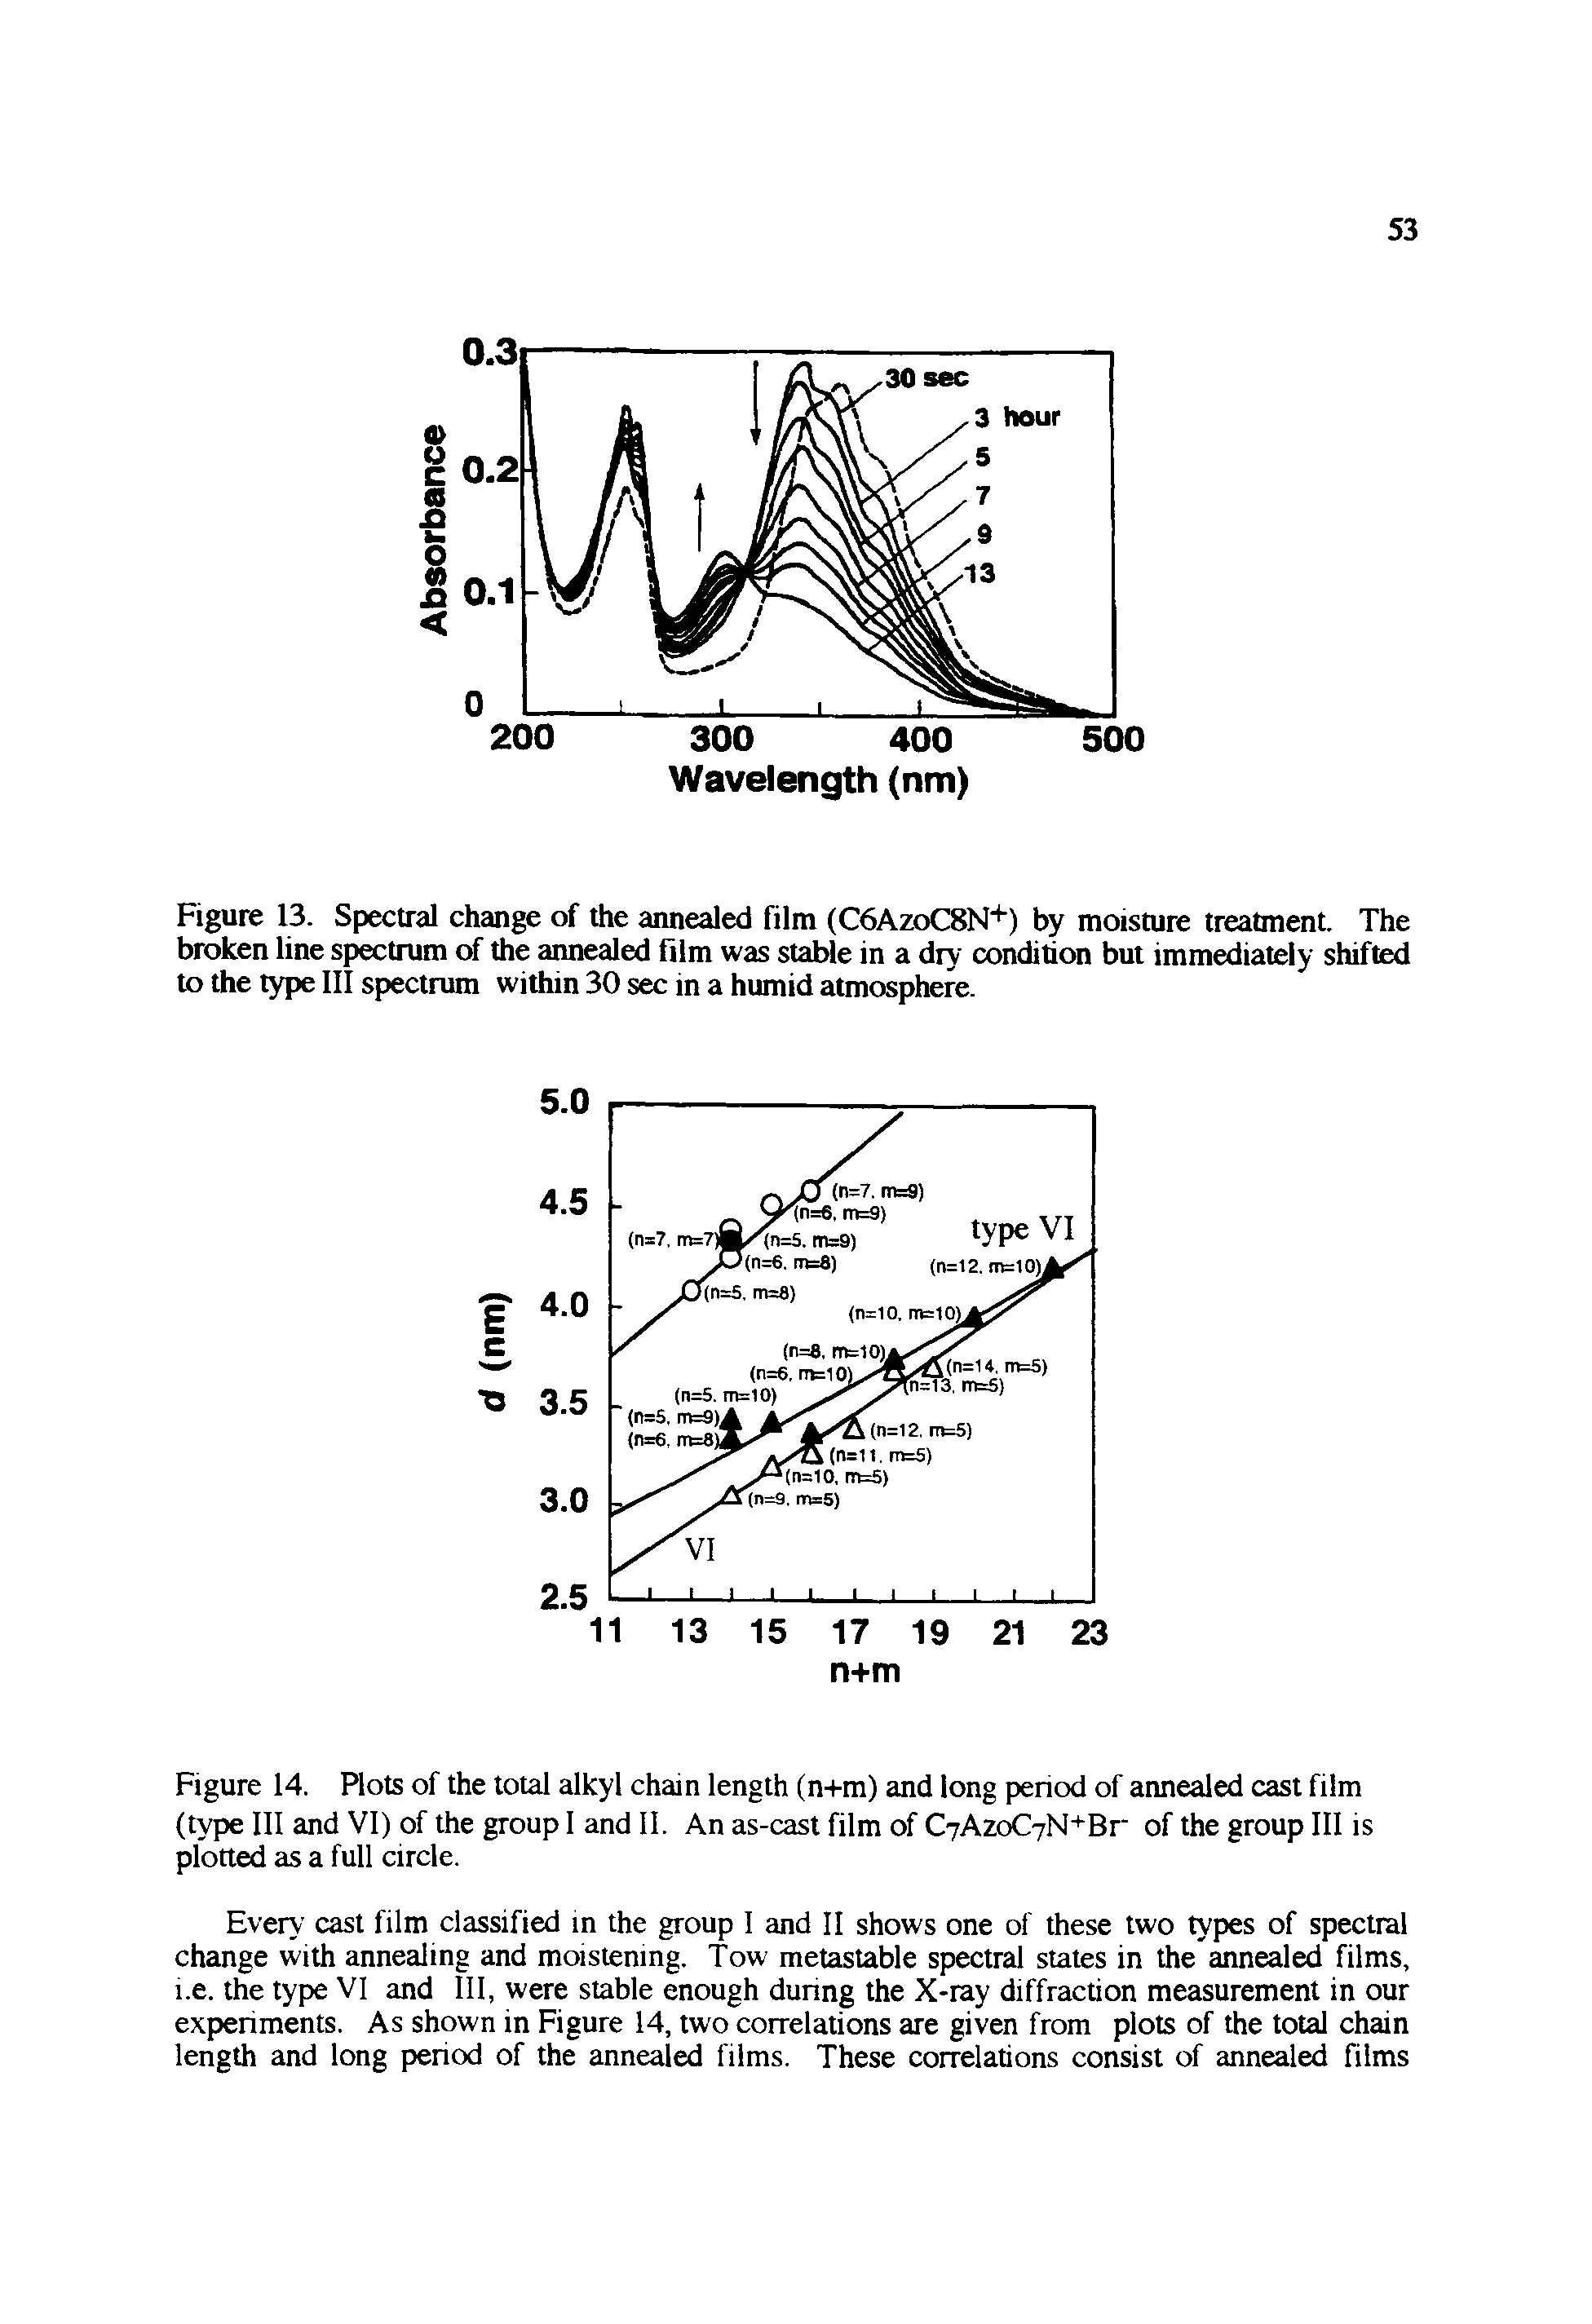 Figure 13. Spectral change of the annealed film (C6AzoC8N+) by moisture treatment. The broken line spectrum of the annealed film was stable in a dry condition but immediately shifted to the type III spectrum within 30 sec in a humid atmosphere.